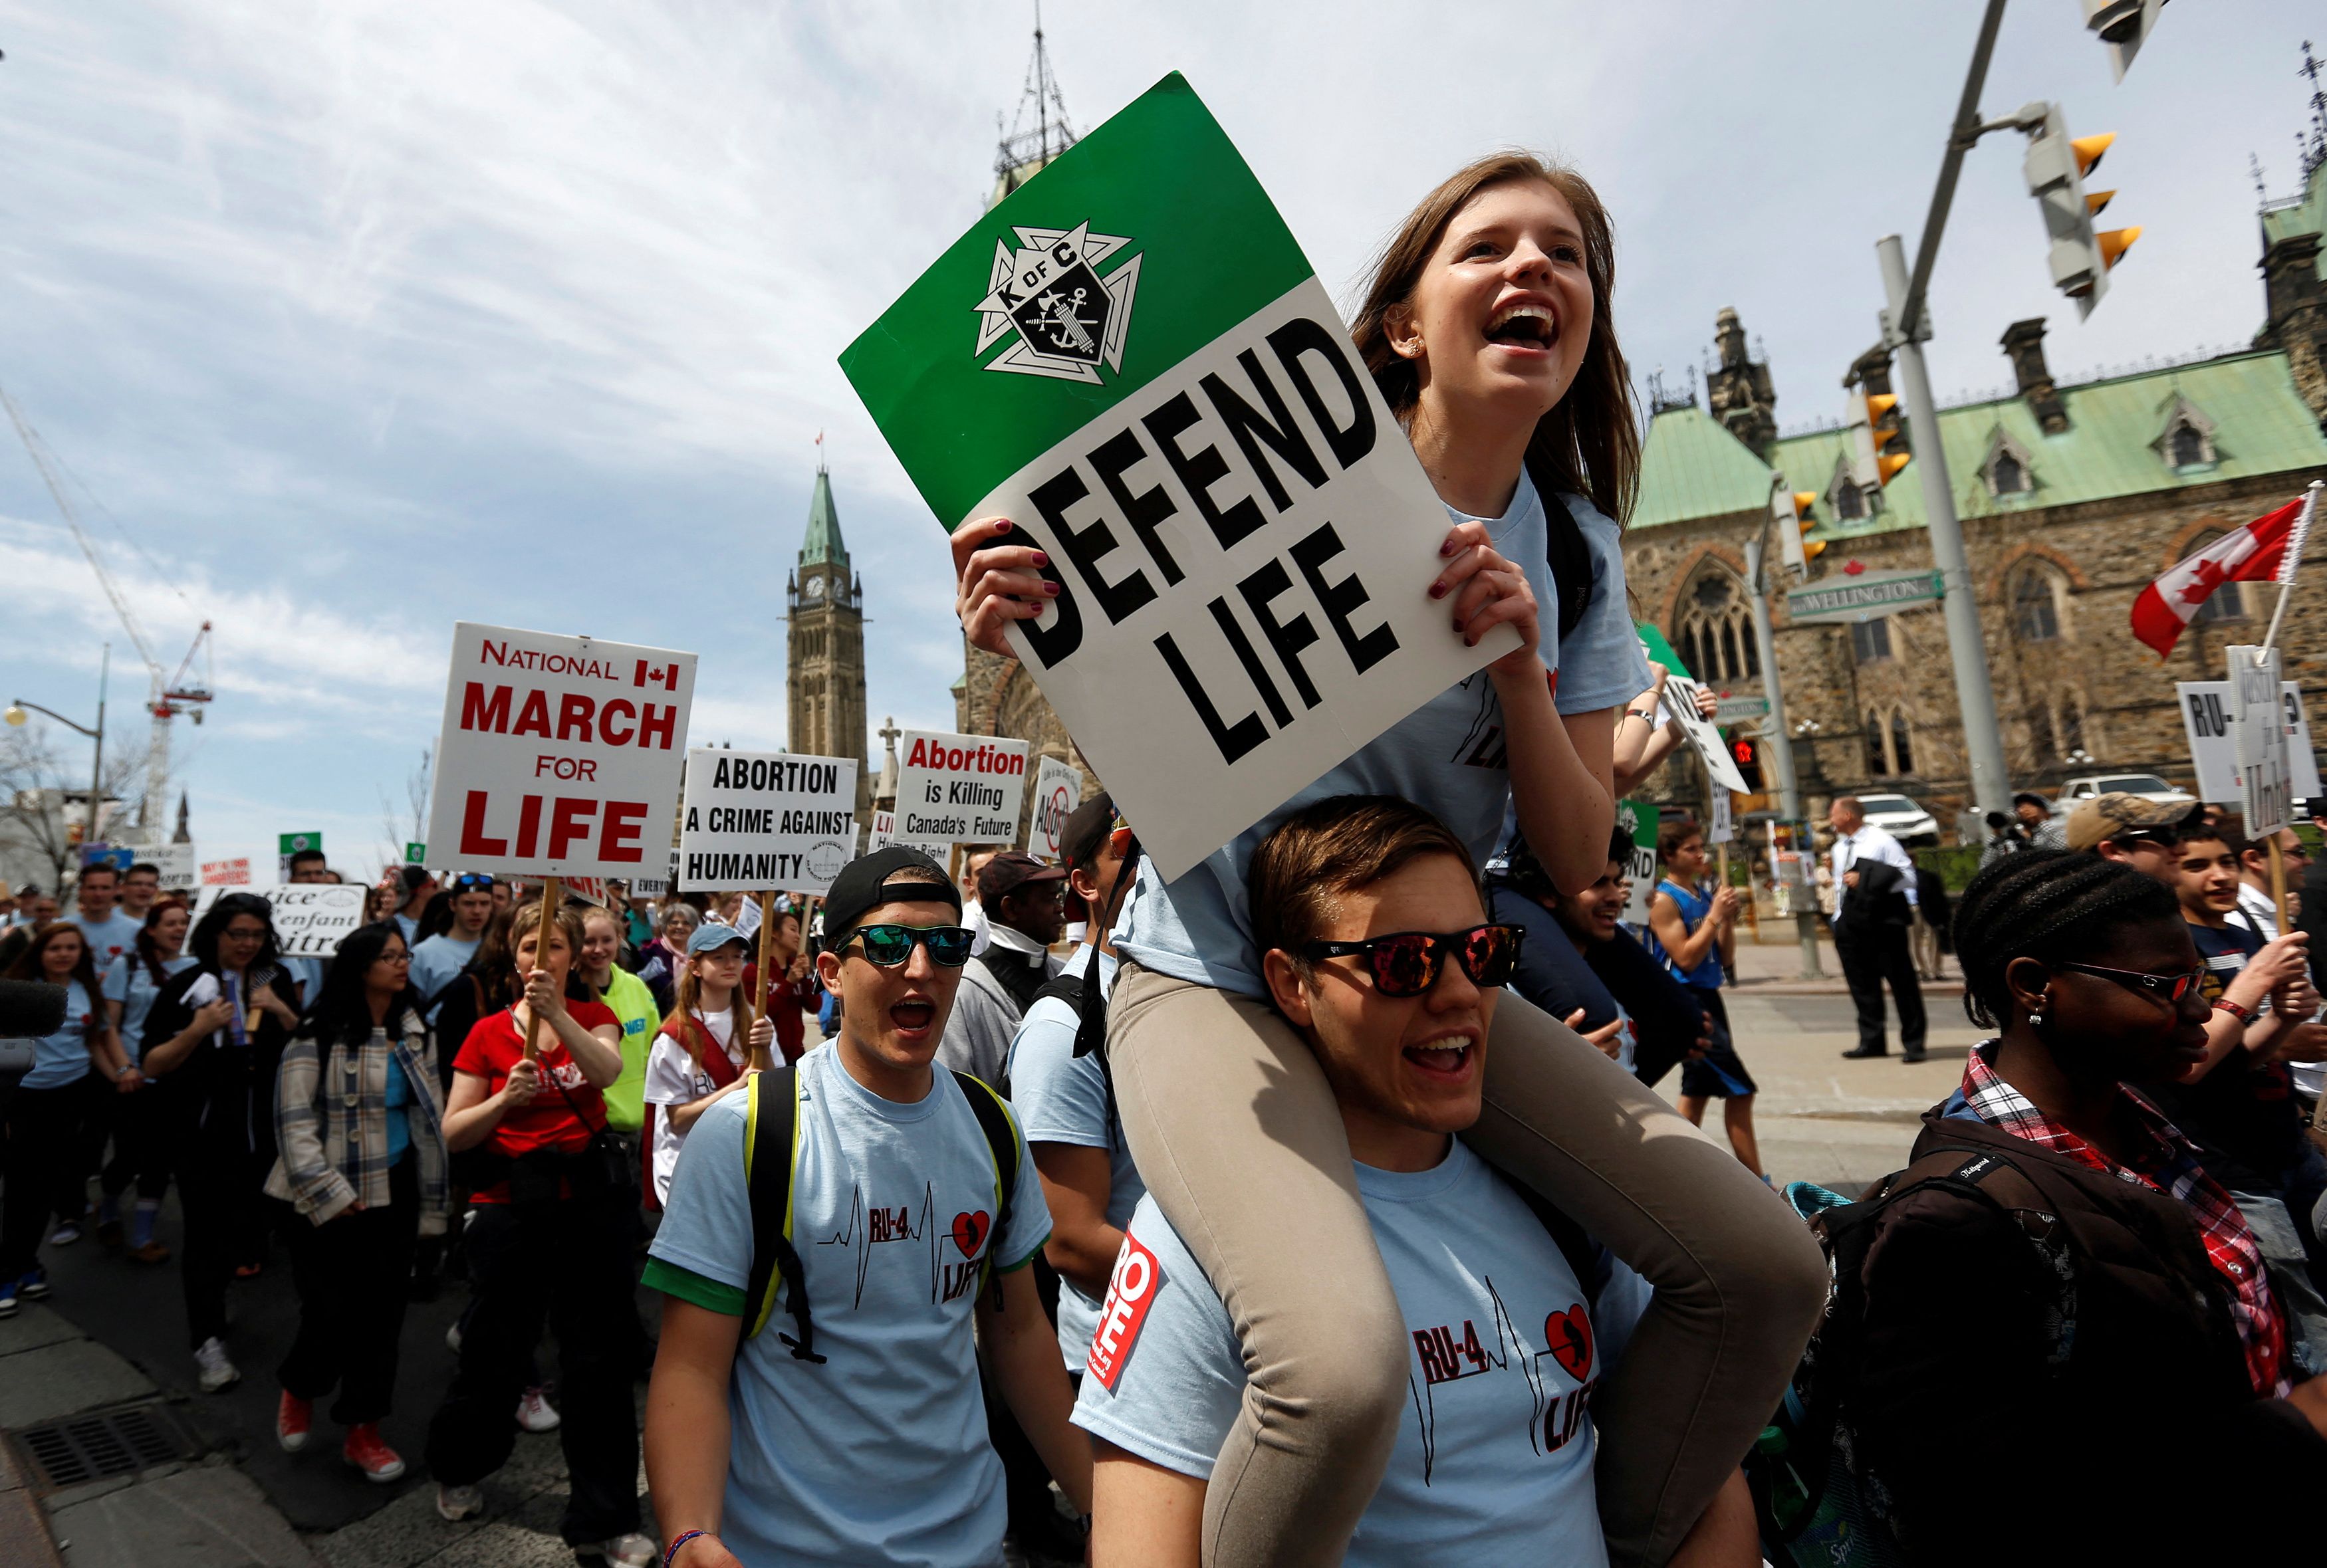 Anti-abortion protesters take part in the National March for Life in Ottawa